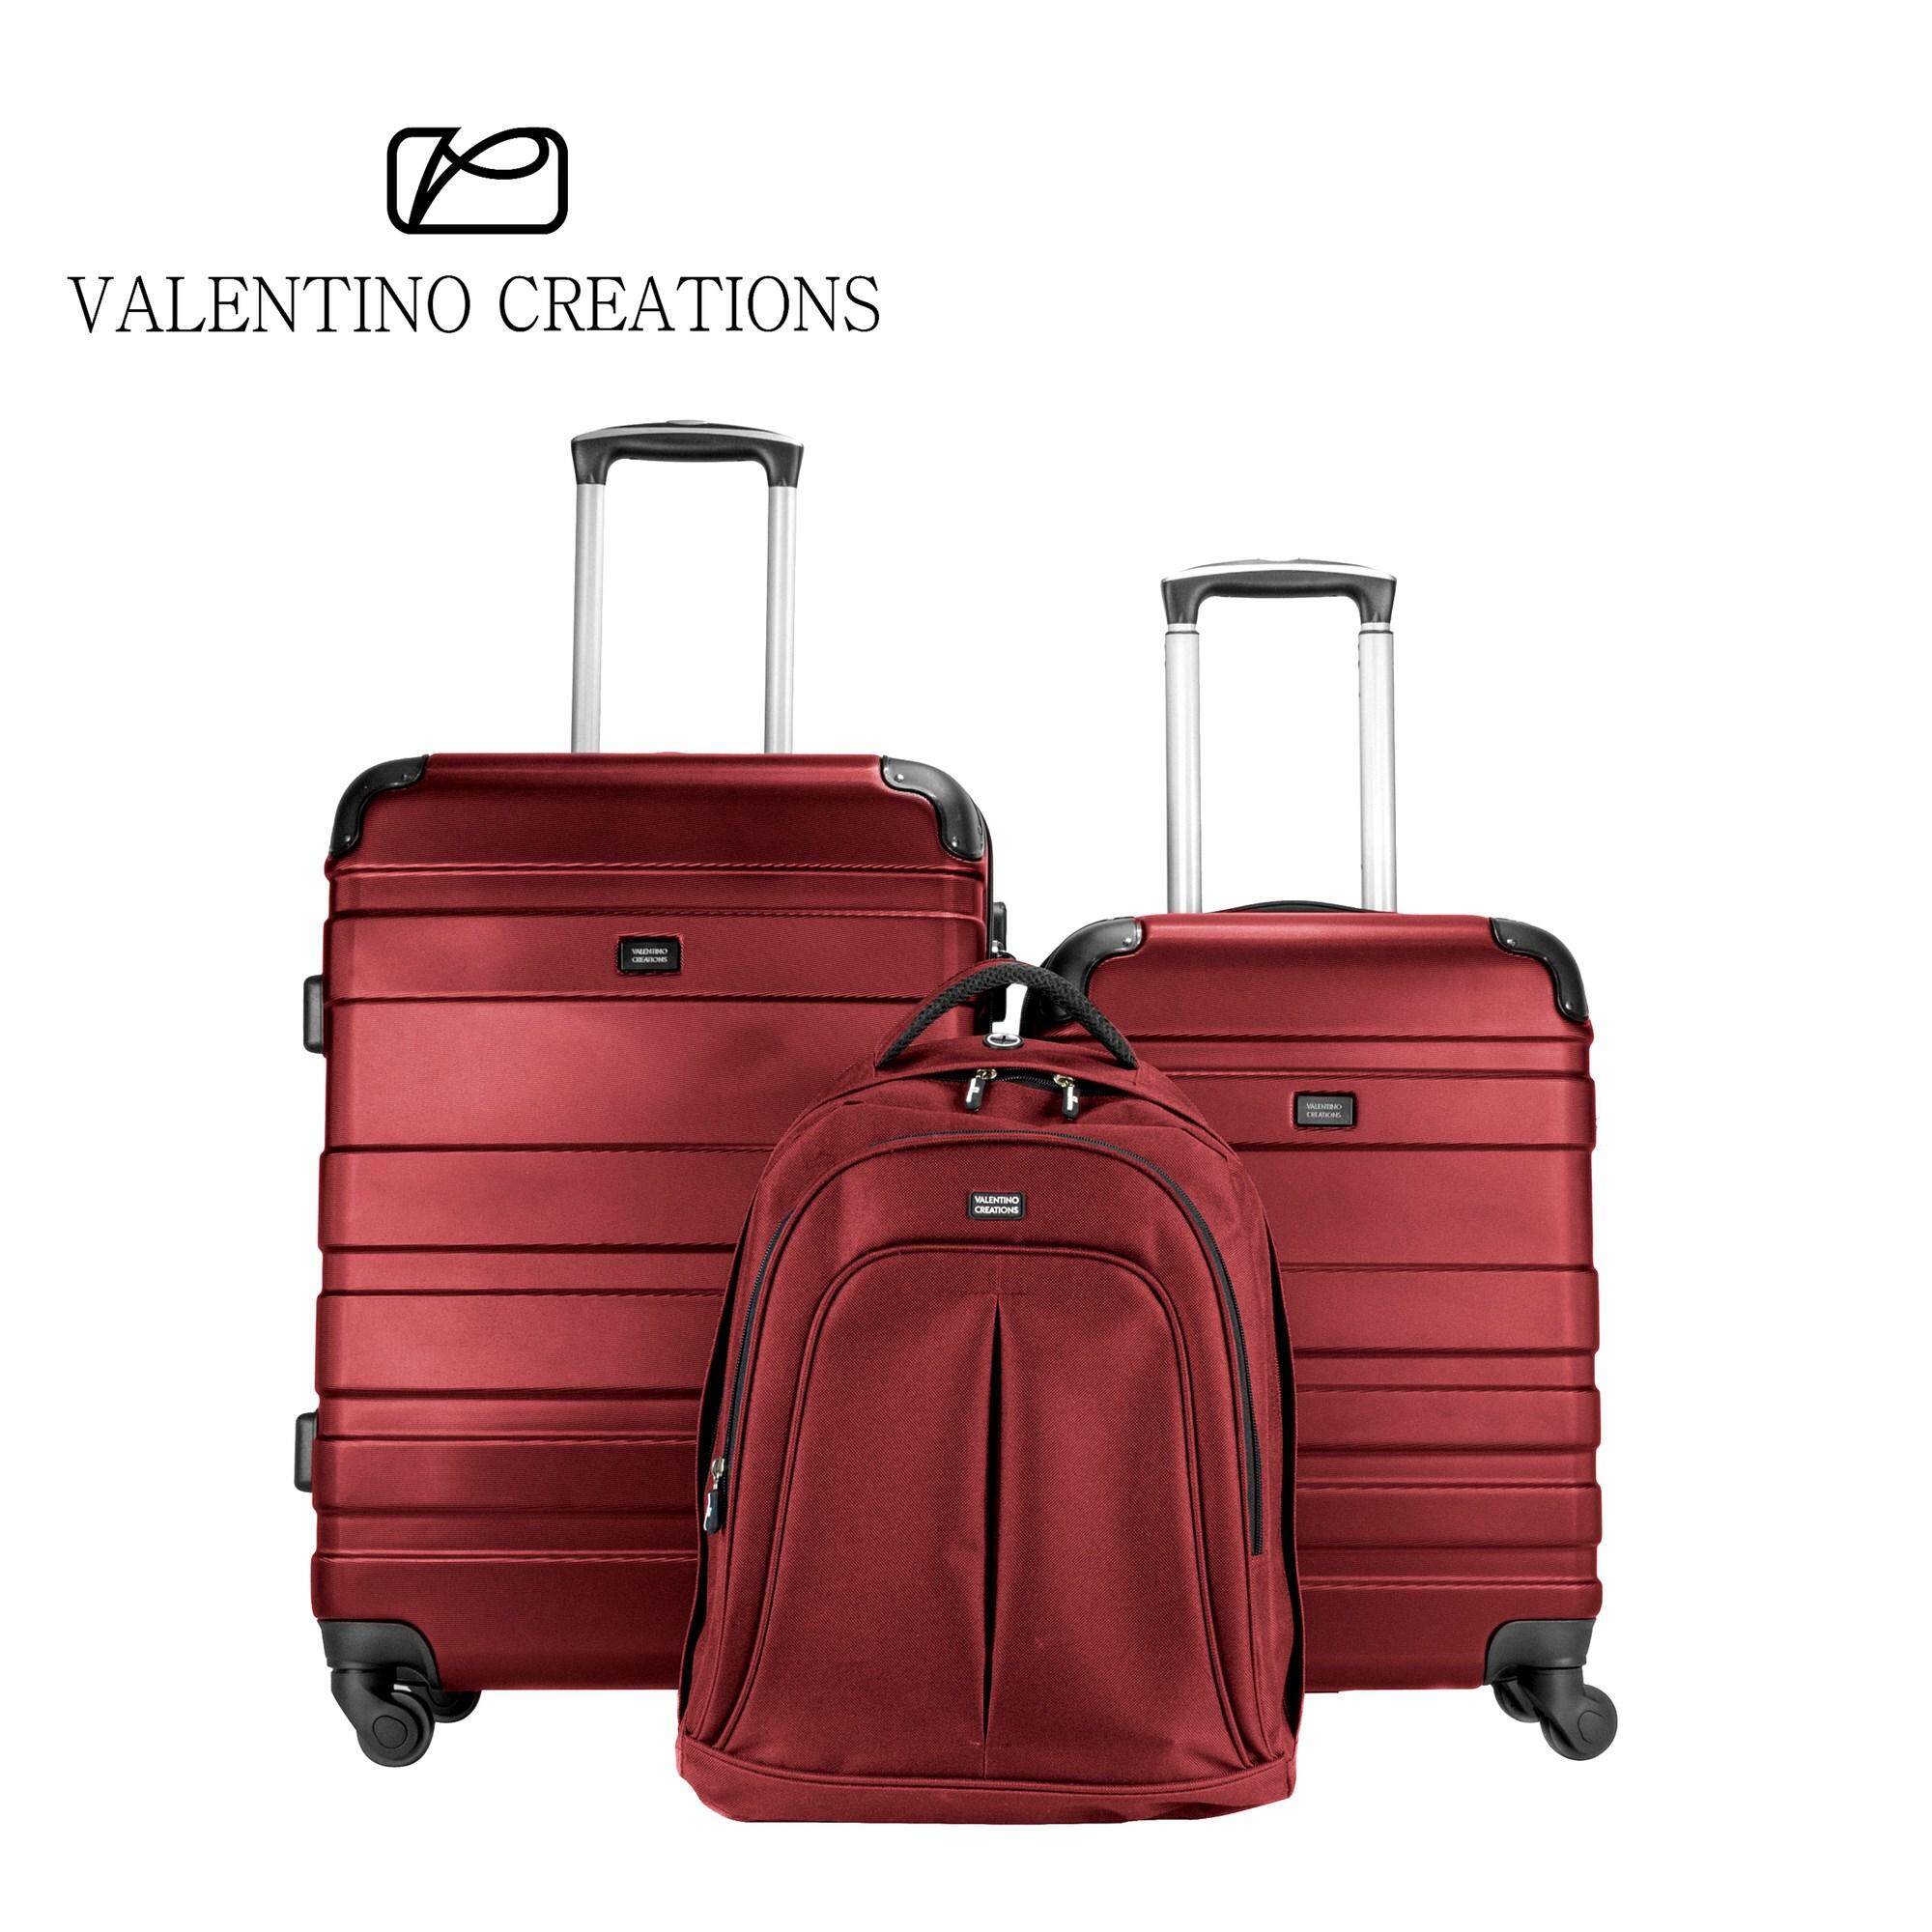 Valentino Creations - Buy Valentino Creations at Best Price in Malaysia ...